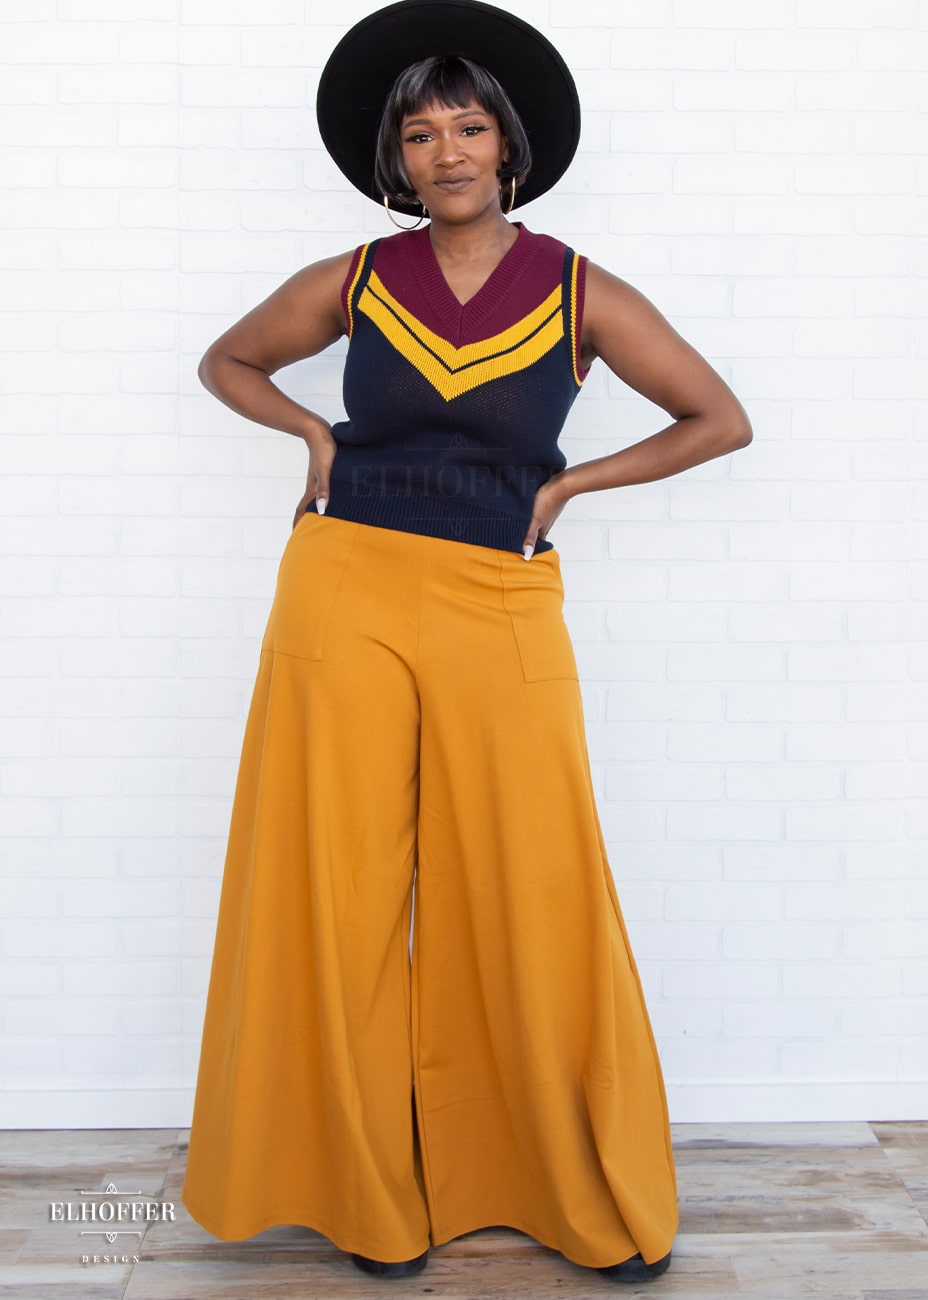 Lynsi, a medium dark skinned model with a dark brown and white bob, is wearing a pullover vest with a boxy fit and v-neck. It is navy blue with a deep red neckline and mustard yellow v detail.